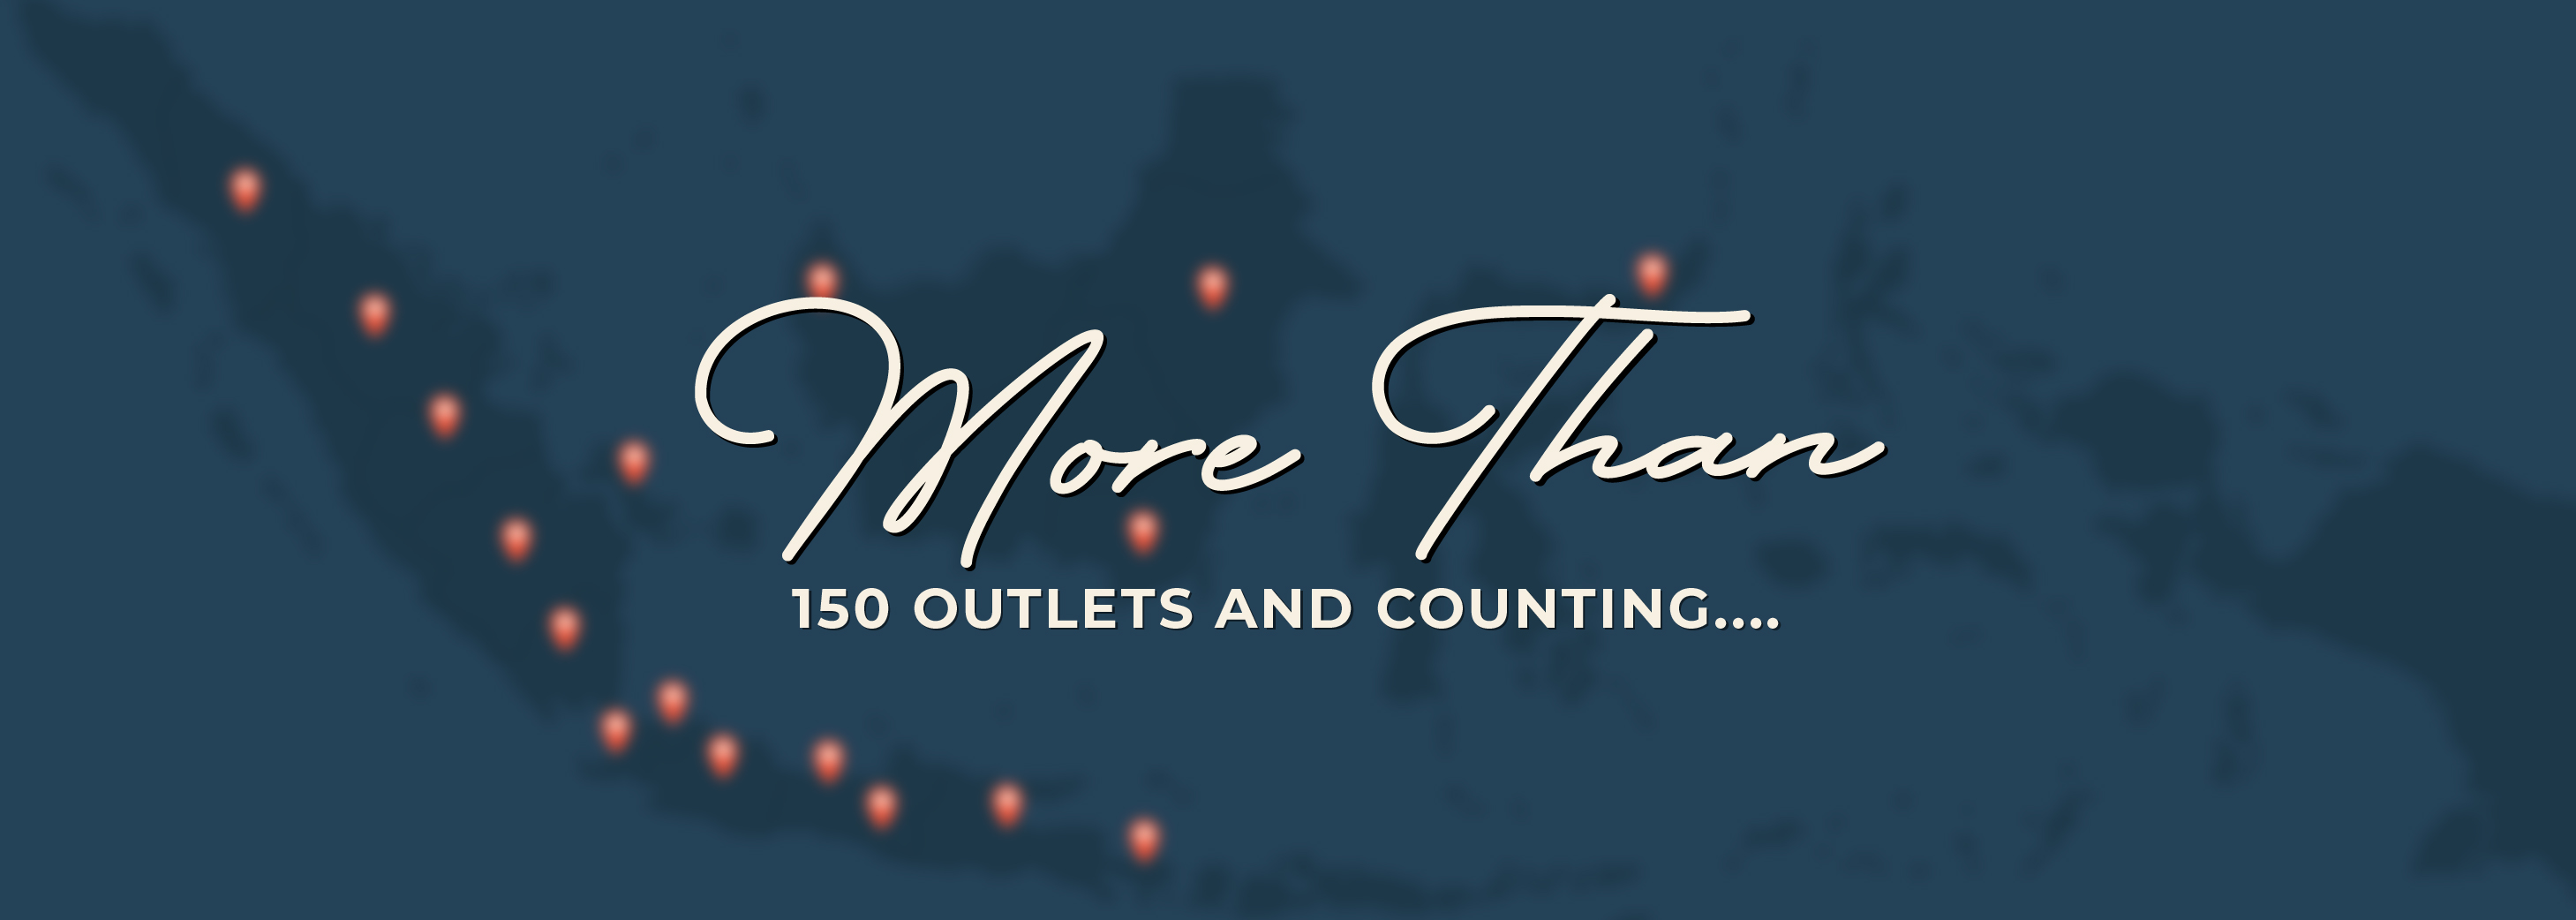 More than 150 outlets and counting....